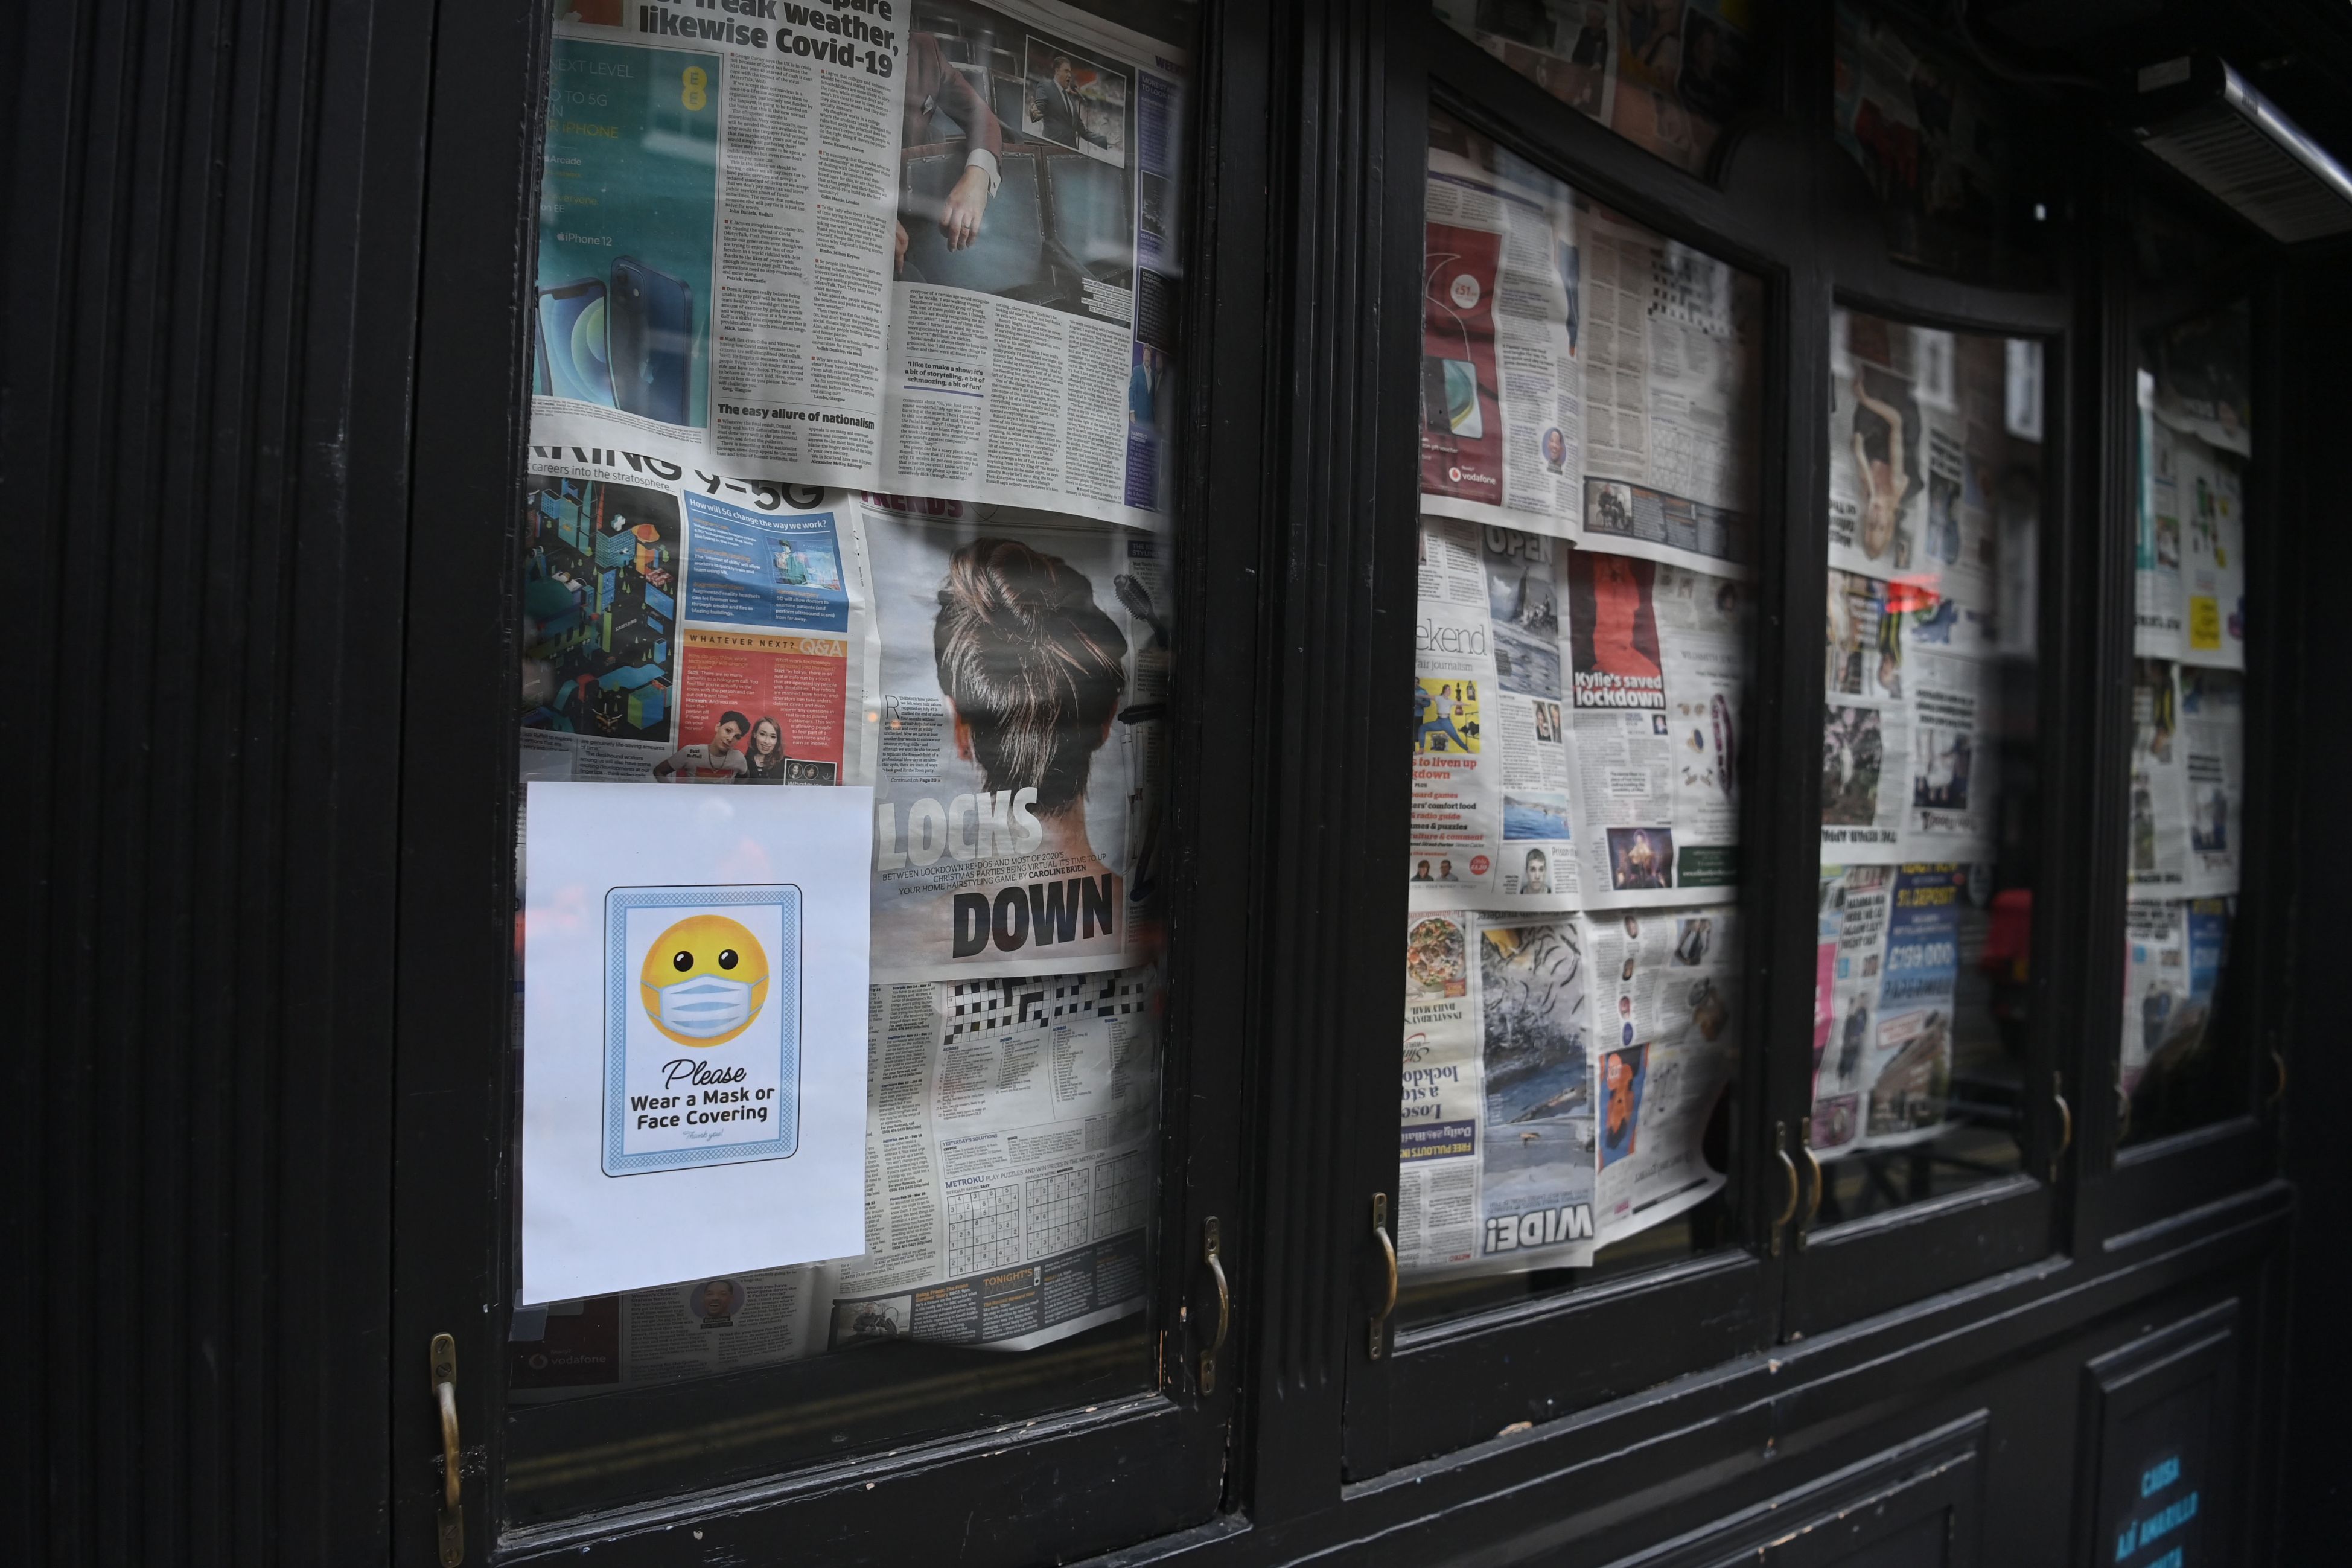 A business windows are covered in newspaper in London, Britain, 06 November 2020. On 05 November 2020 until 02 December 2020 Britain is in lockdown with government advise to stay at home, avoid meeting people you do not live with and to close certain businesses and venues. 